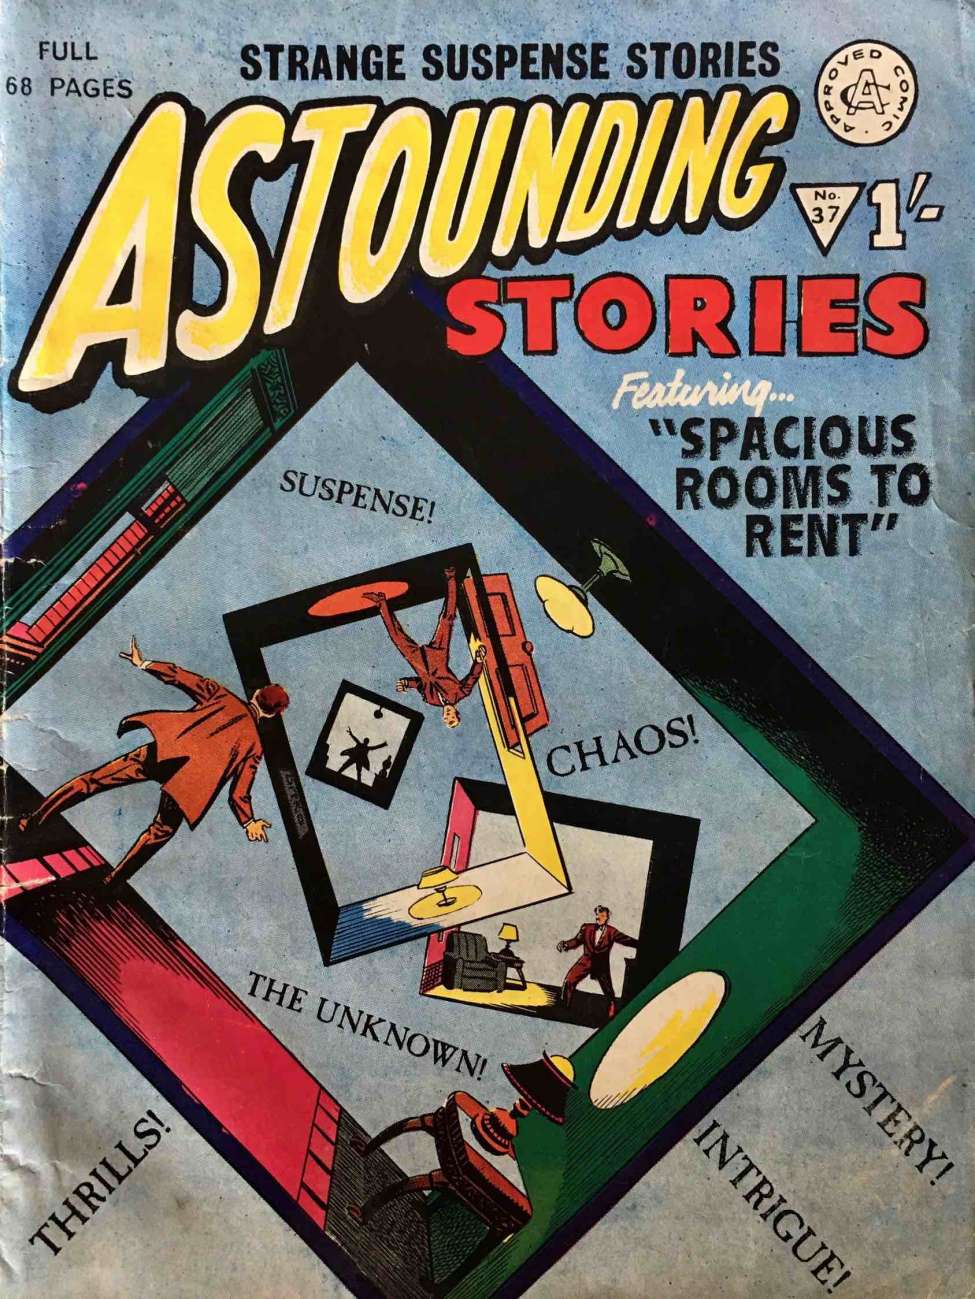 Book Cover For Astounding Stories 37